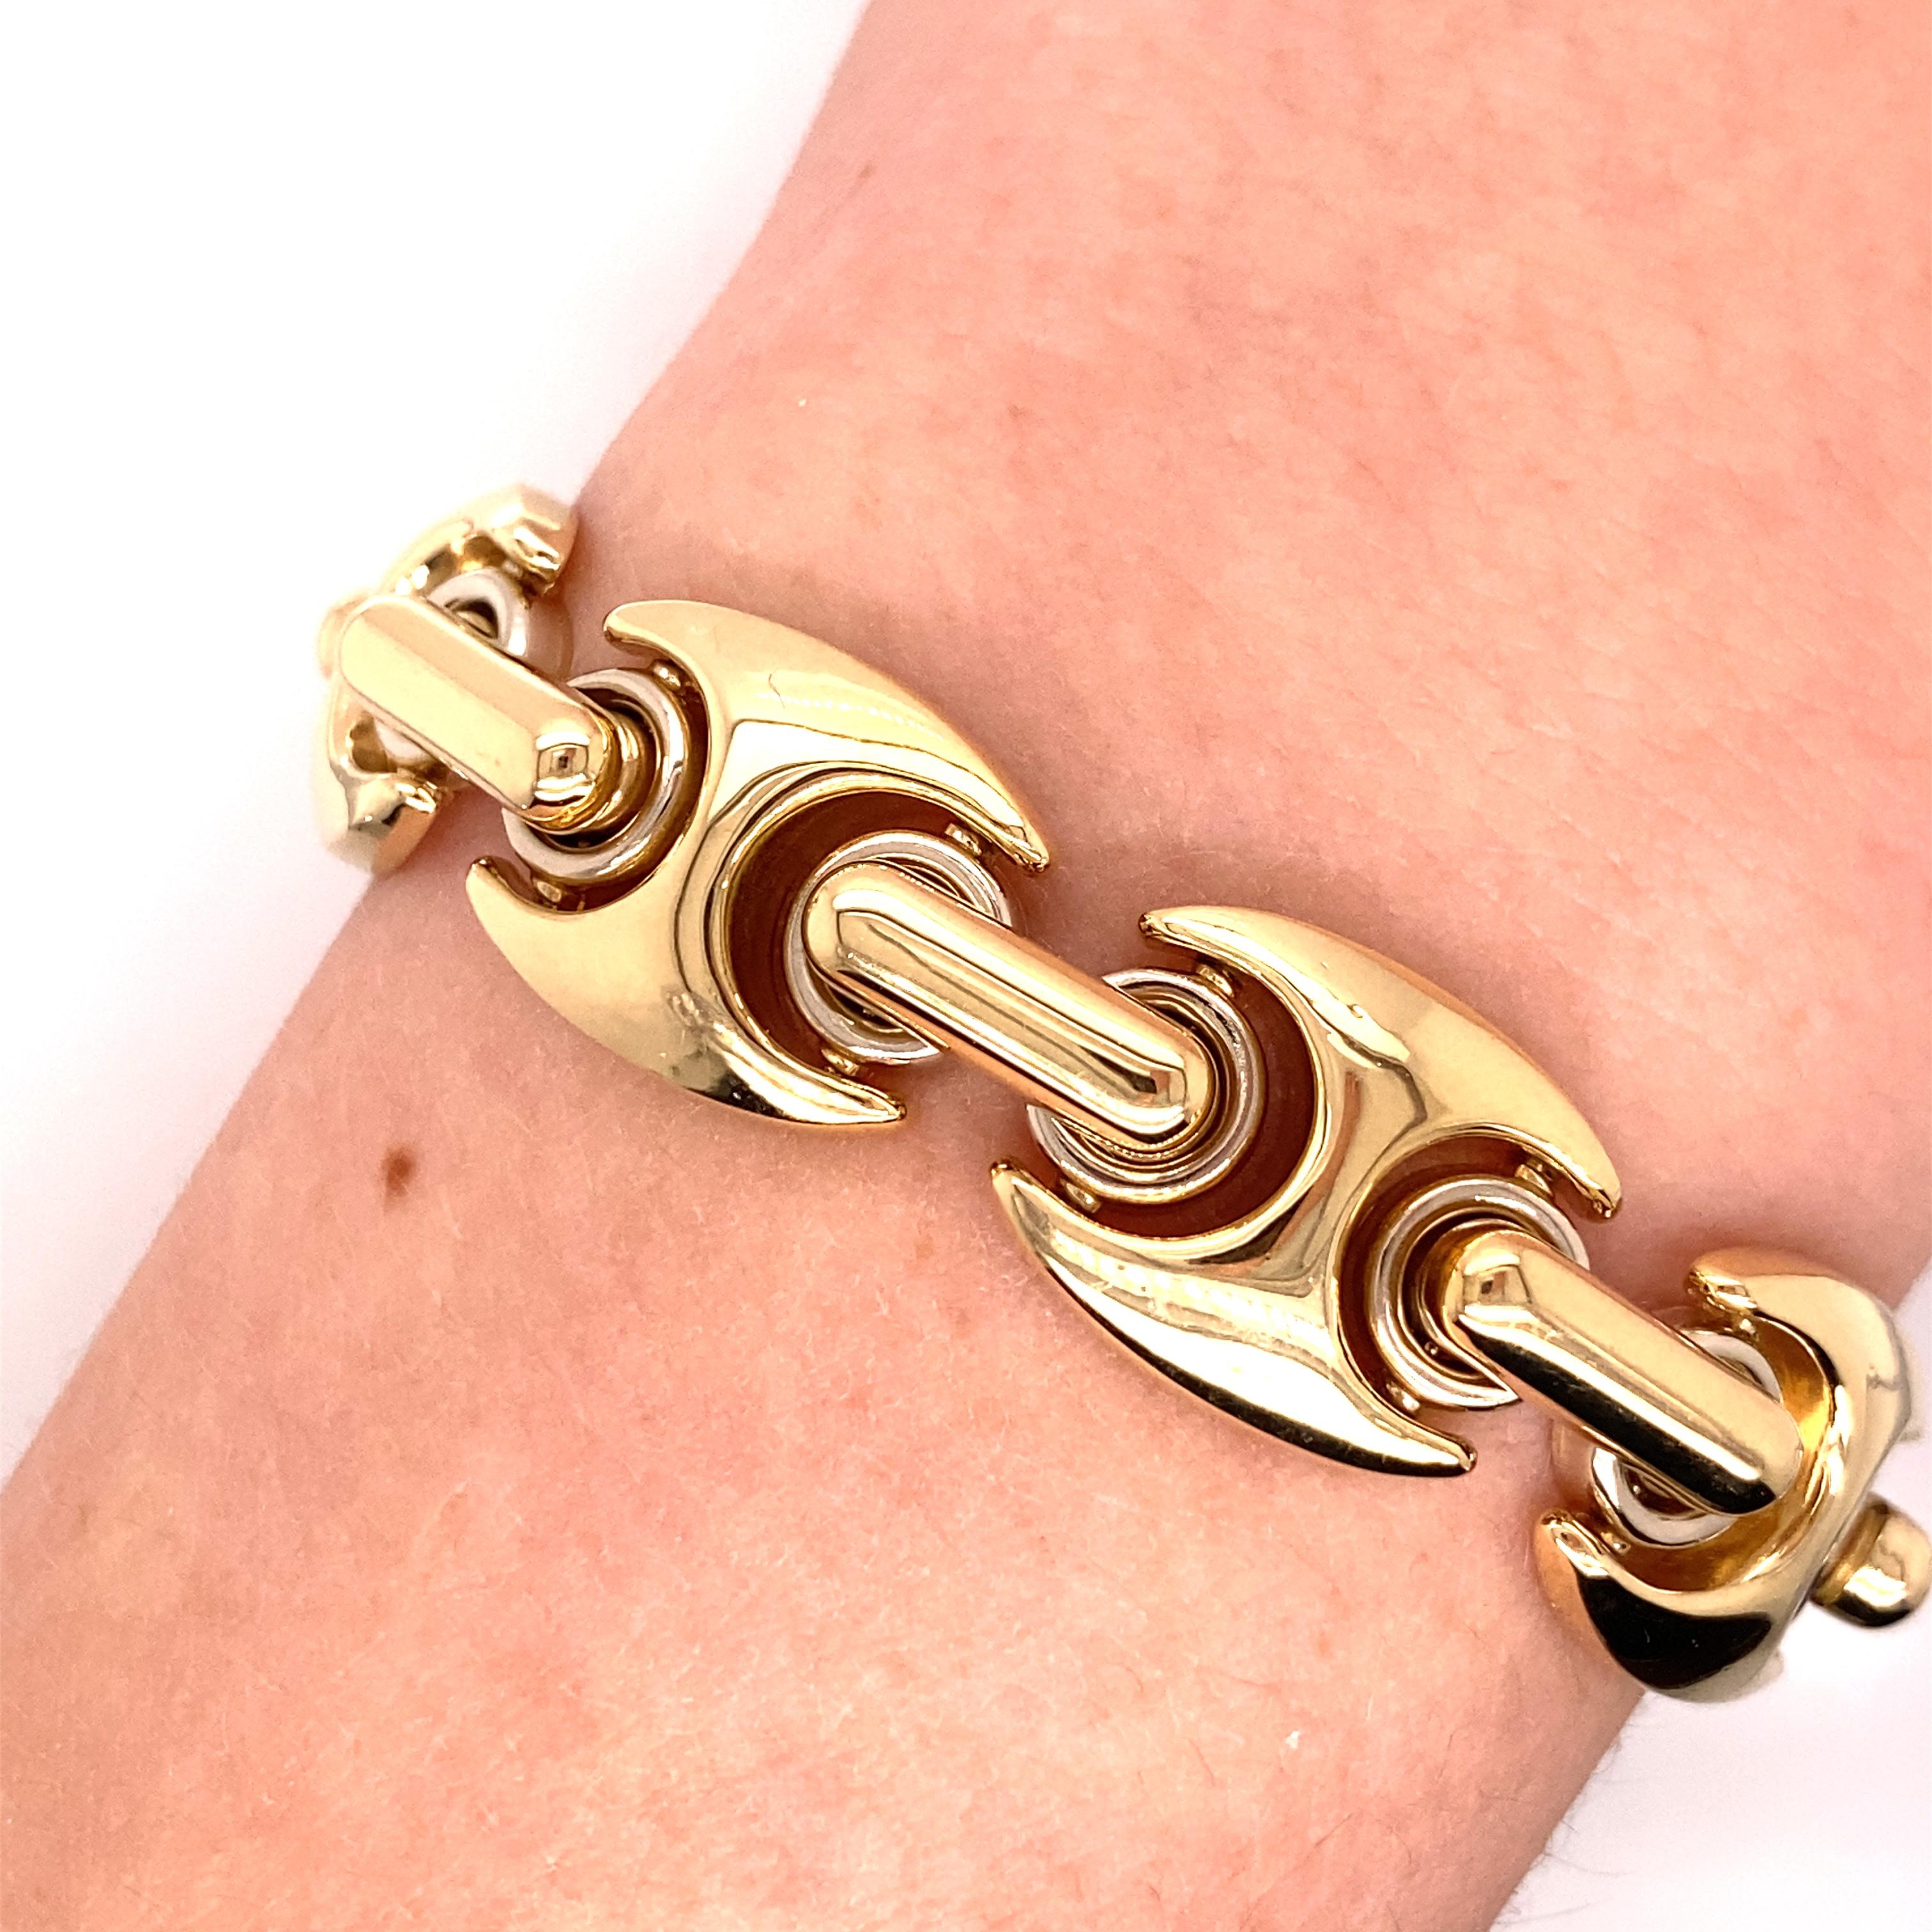 Vintage 1990's 14K Yellow Gold Italian Made Wide Link Bracelet - The bracelet measures .5 inches wide and 7.5 inches long and features a hidden plunger clasp built into a link with a safety latch. The bracelet weighs 28.84 grams of gold. 